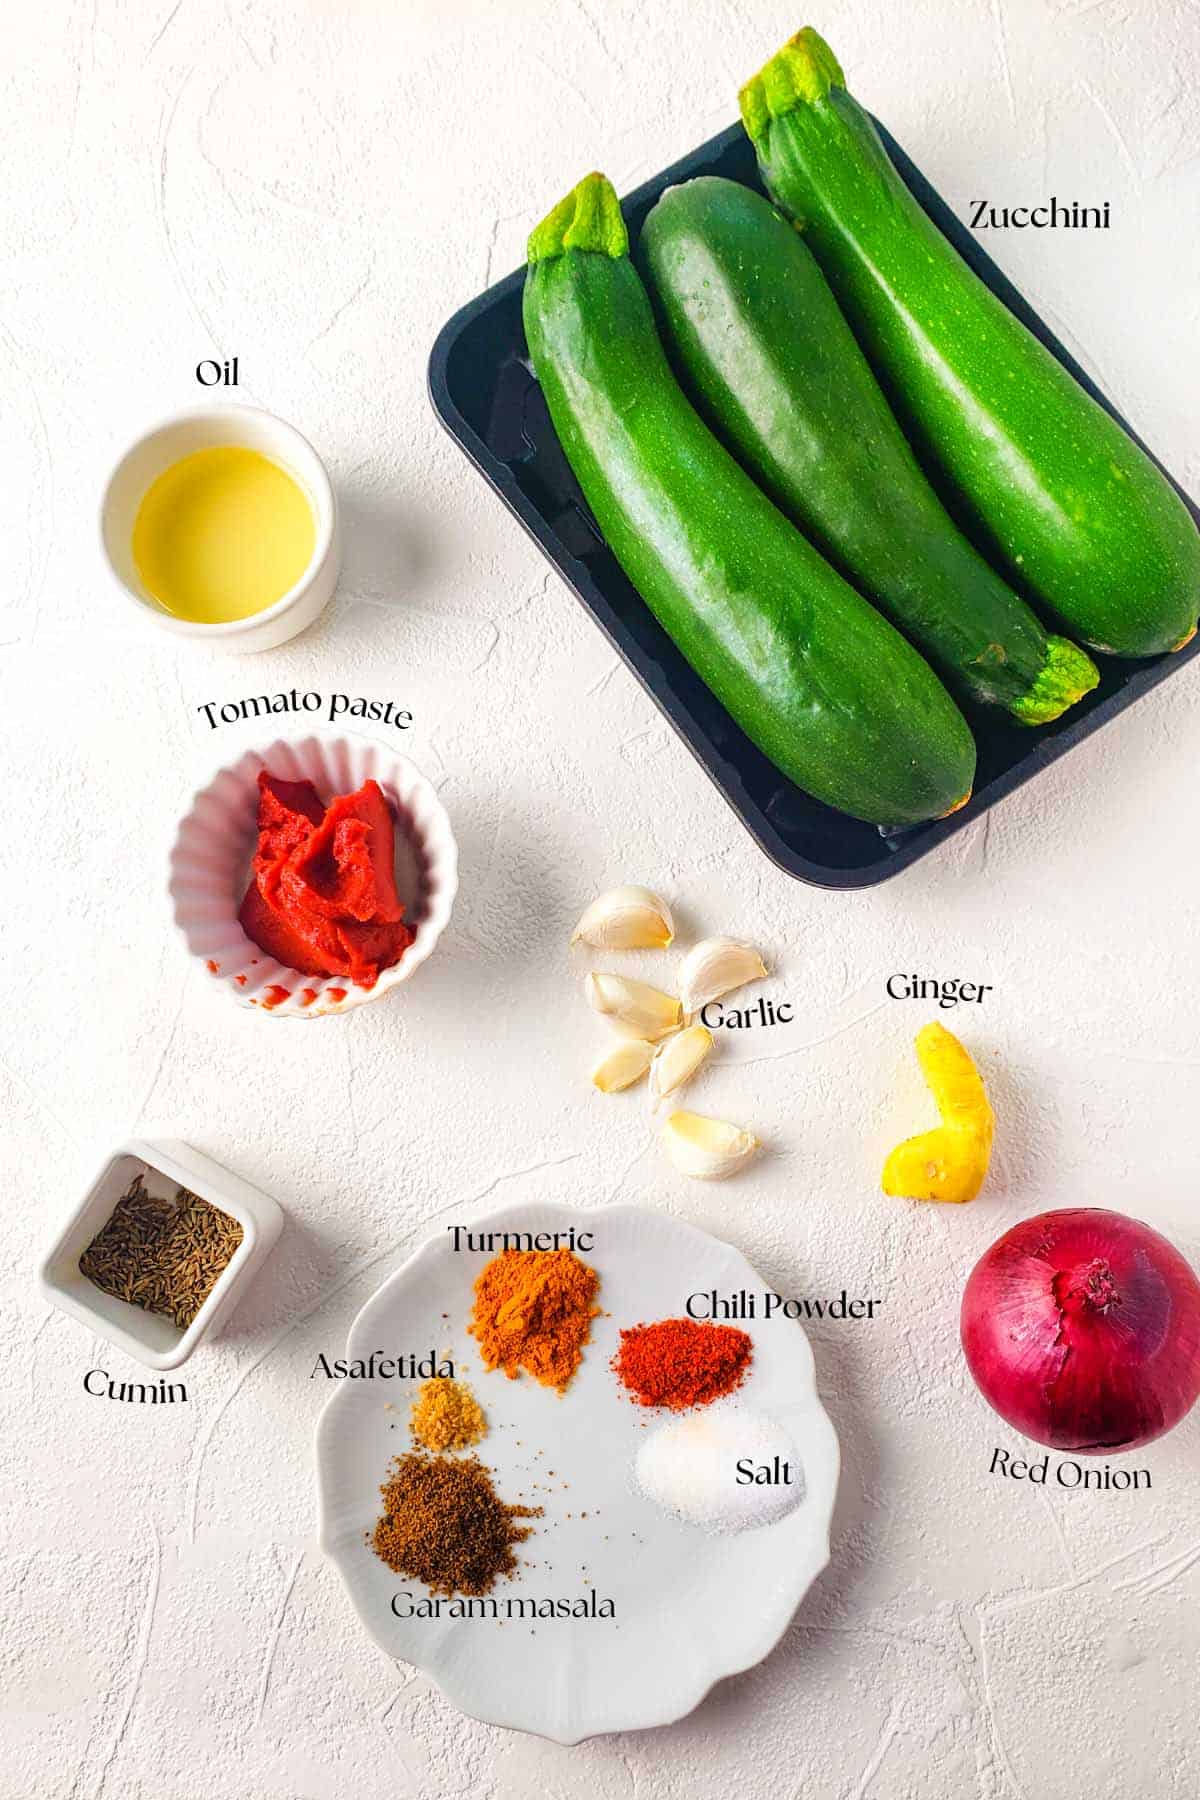 image showing all the ingredients required for making the indian zucchini sabji